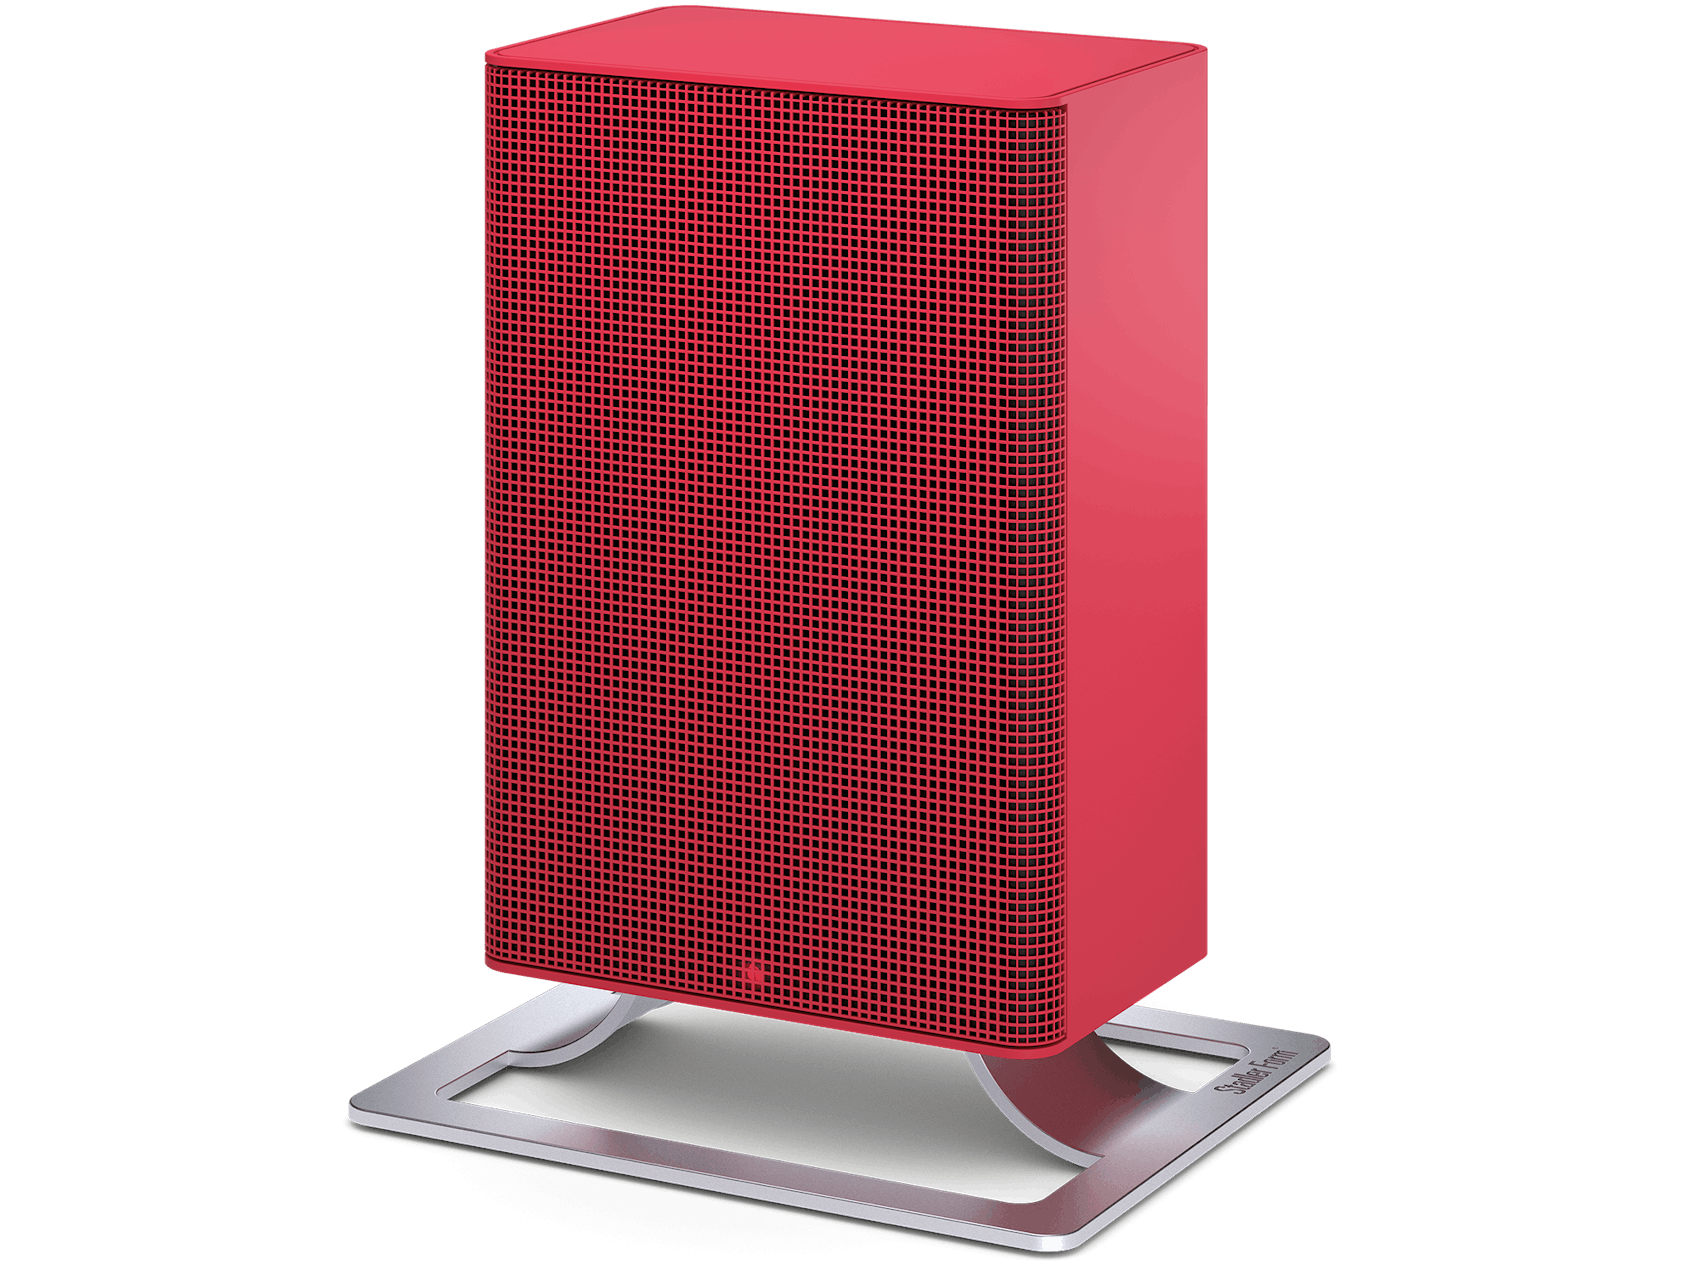 Anna little heater by Stadler Form in chili red as perspective view